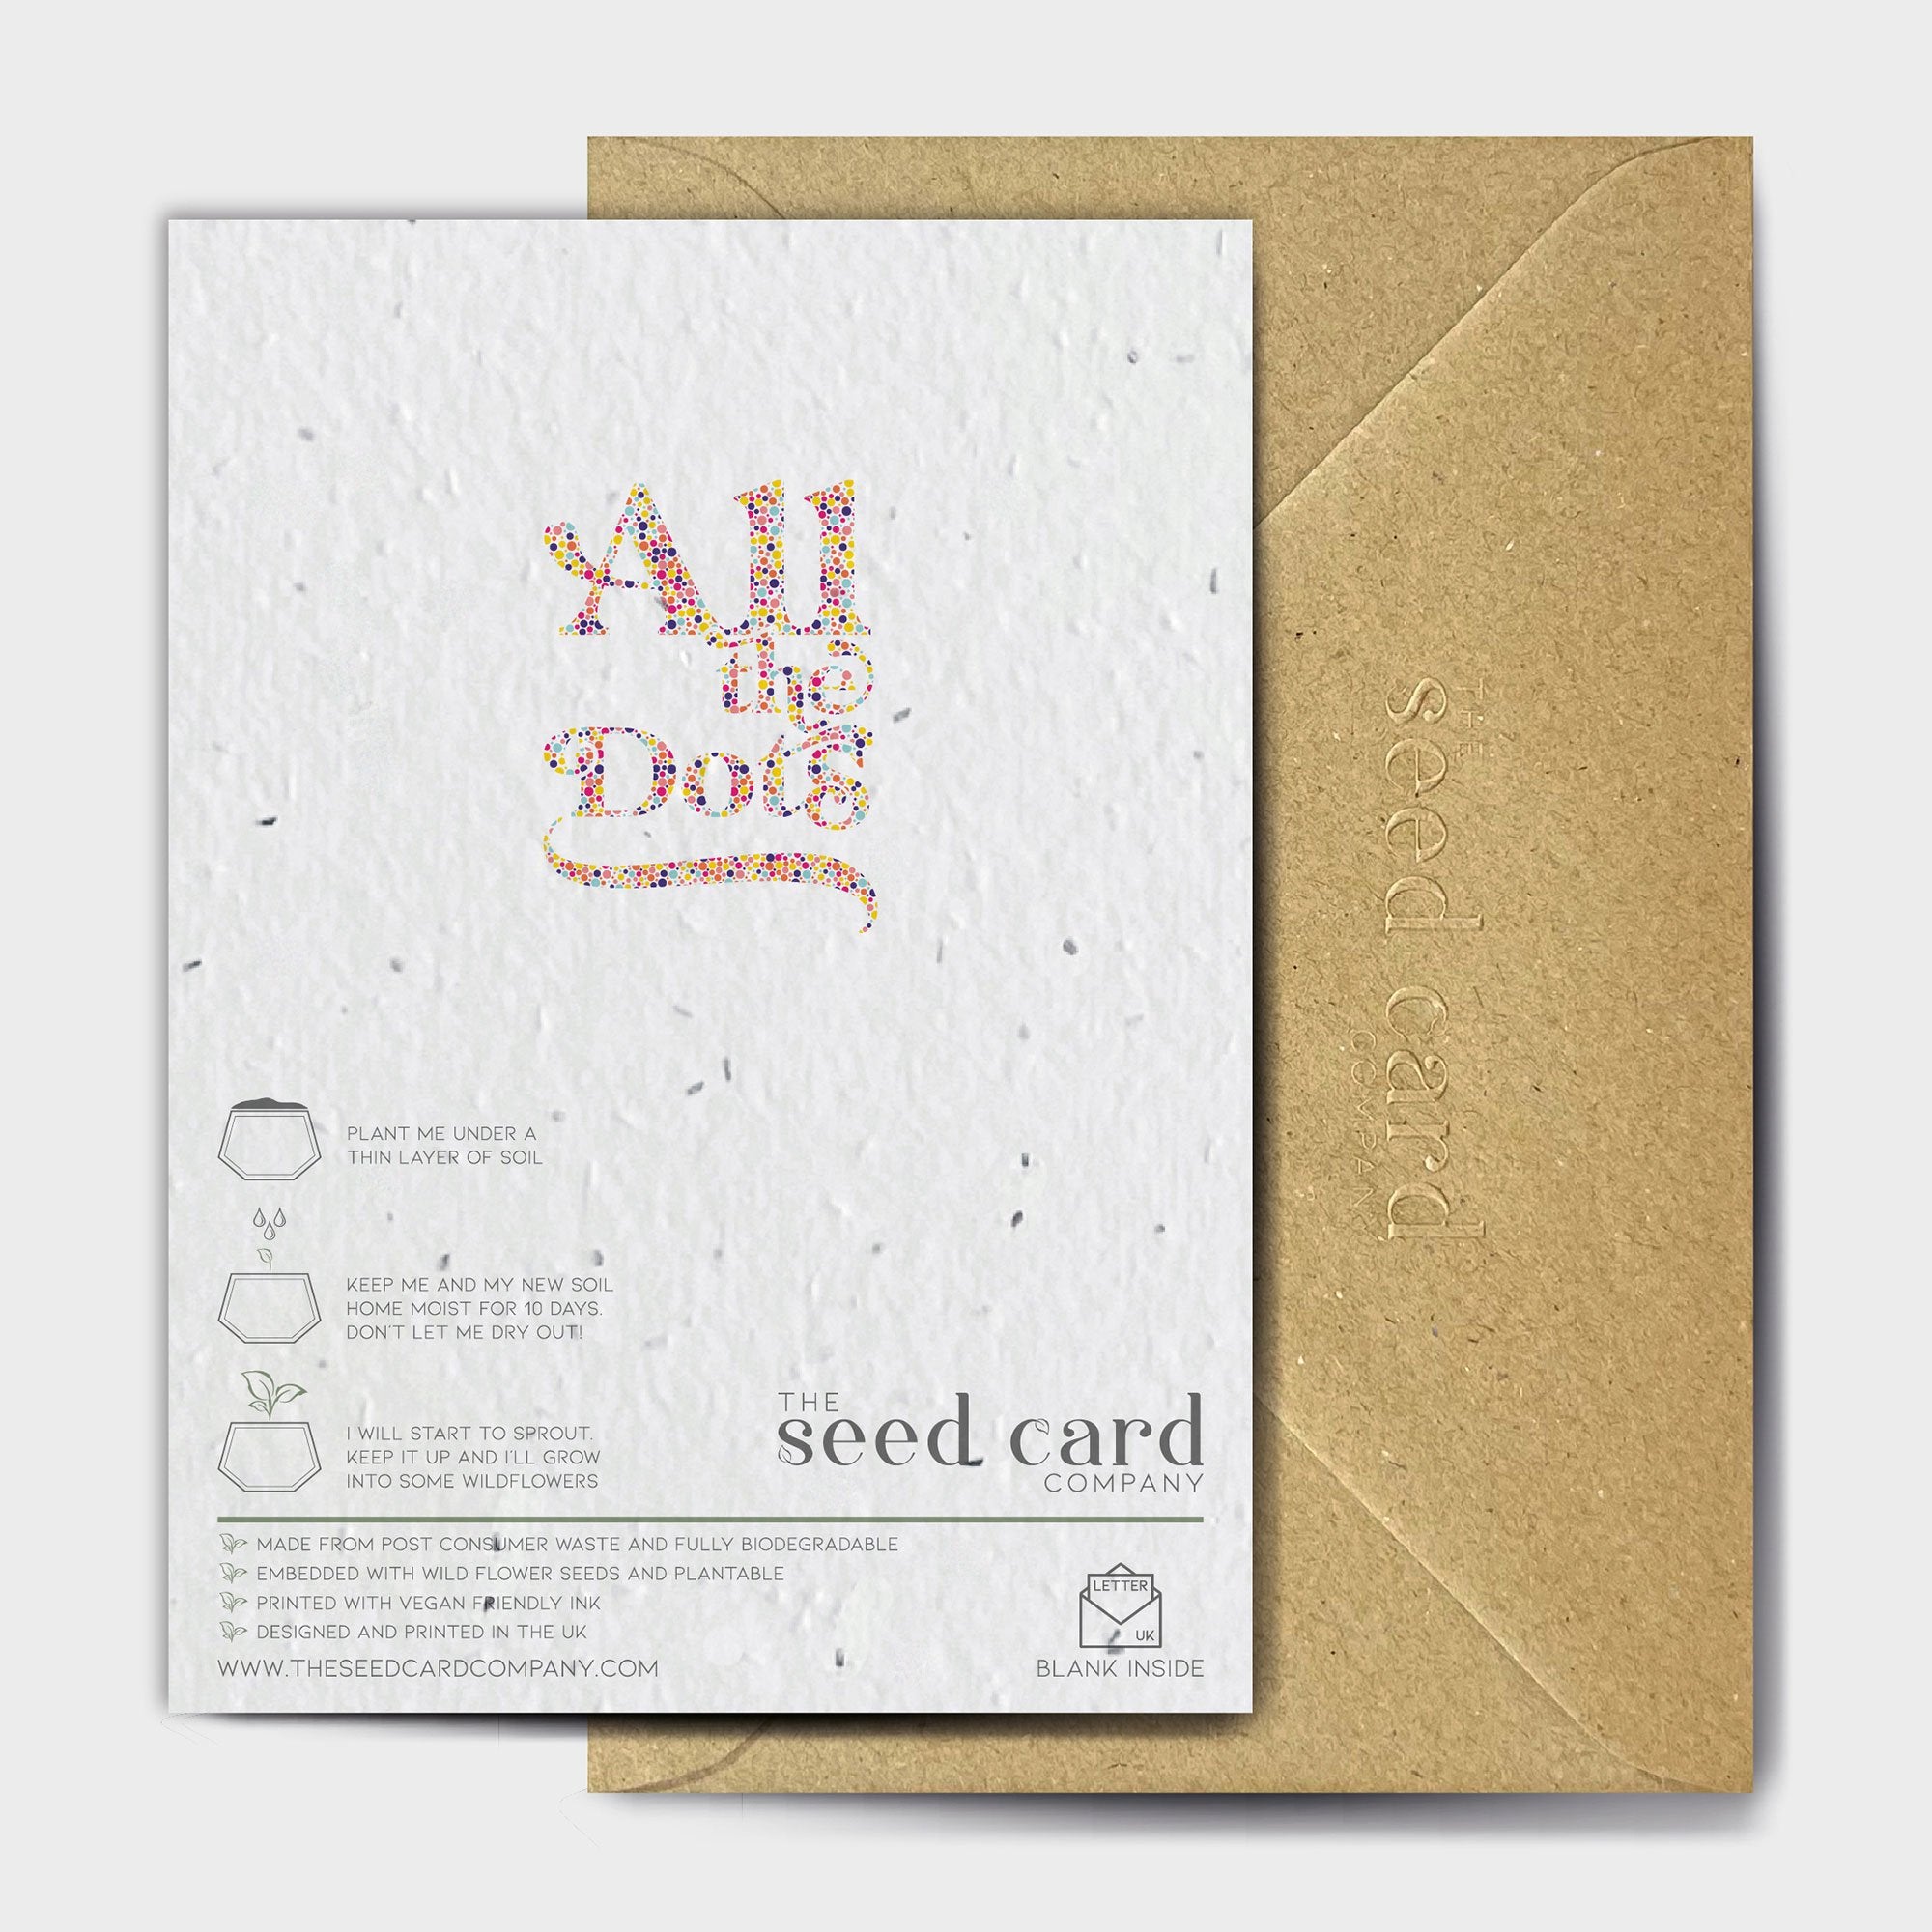 Shop online Happy Valendot's Day - 100% biodegradable seed-embedded cards Shop -The Seed Card Company